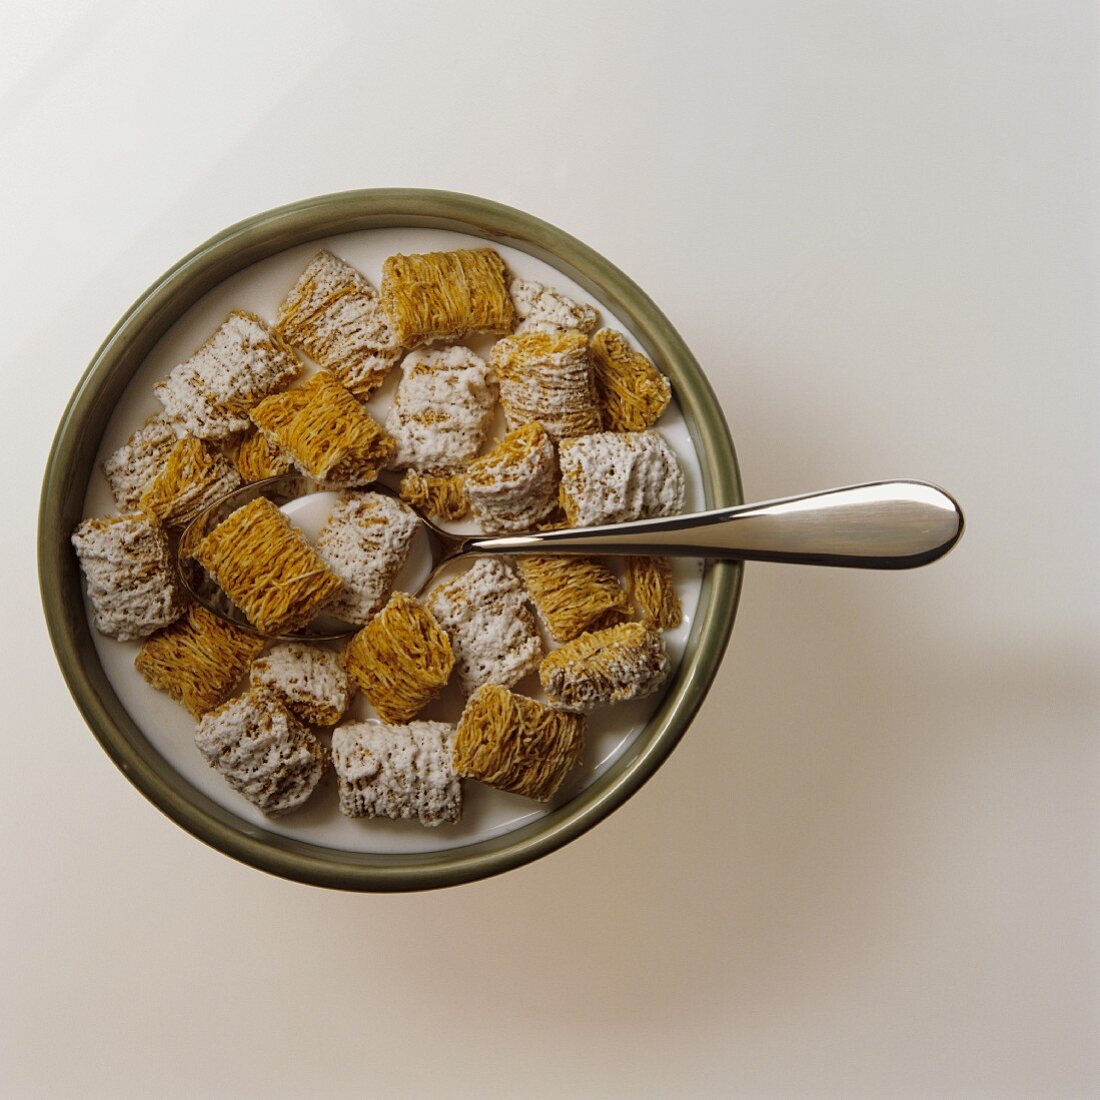 Bowl of Frosted Shredded Wheat Cereal with Milk and a Spoon; From Above